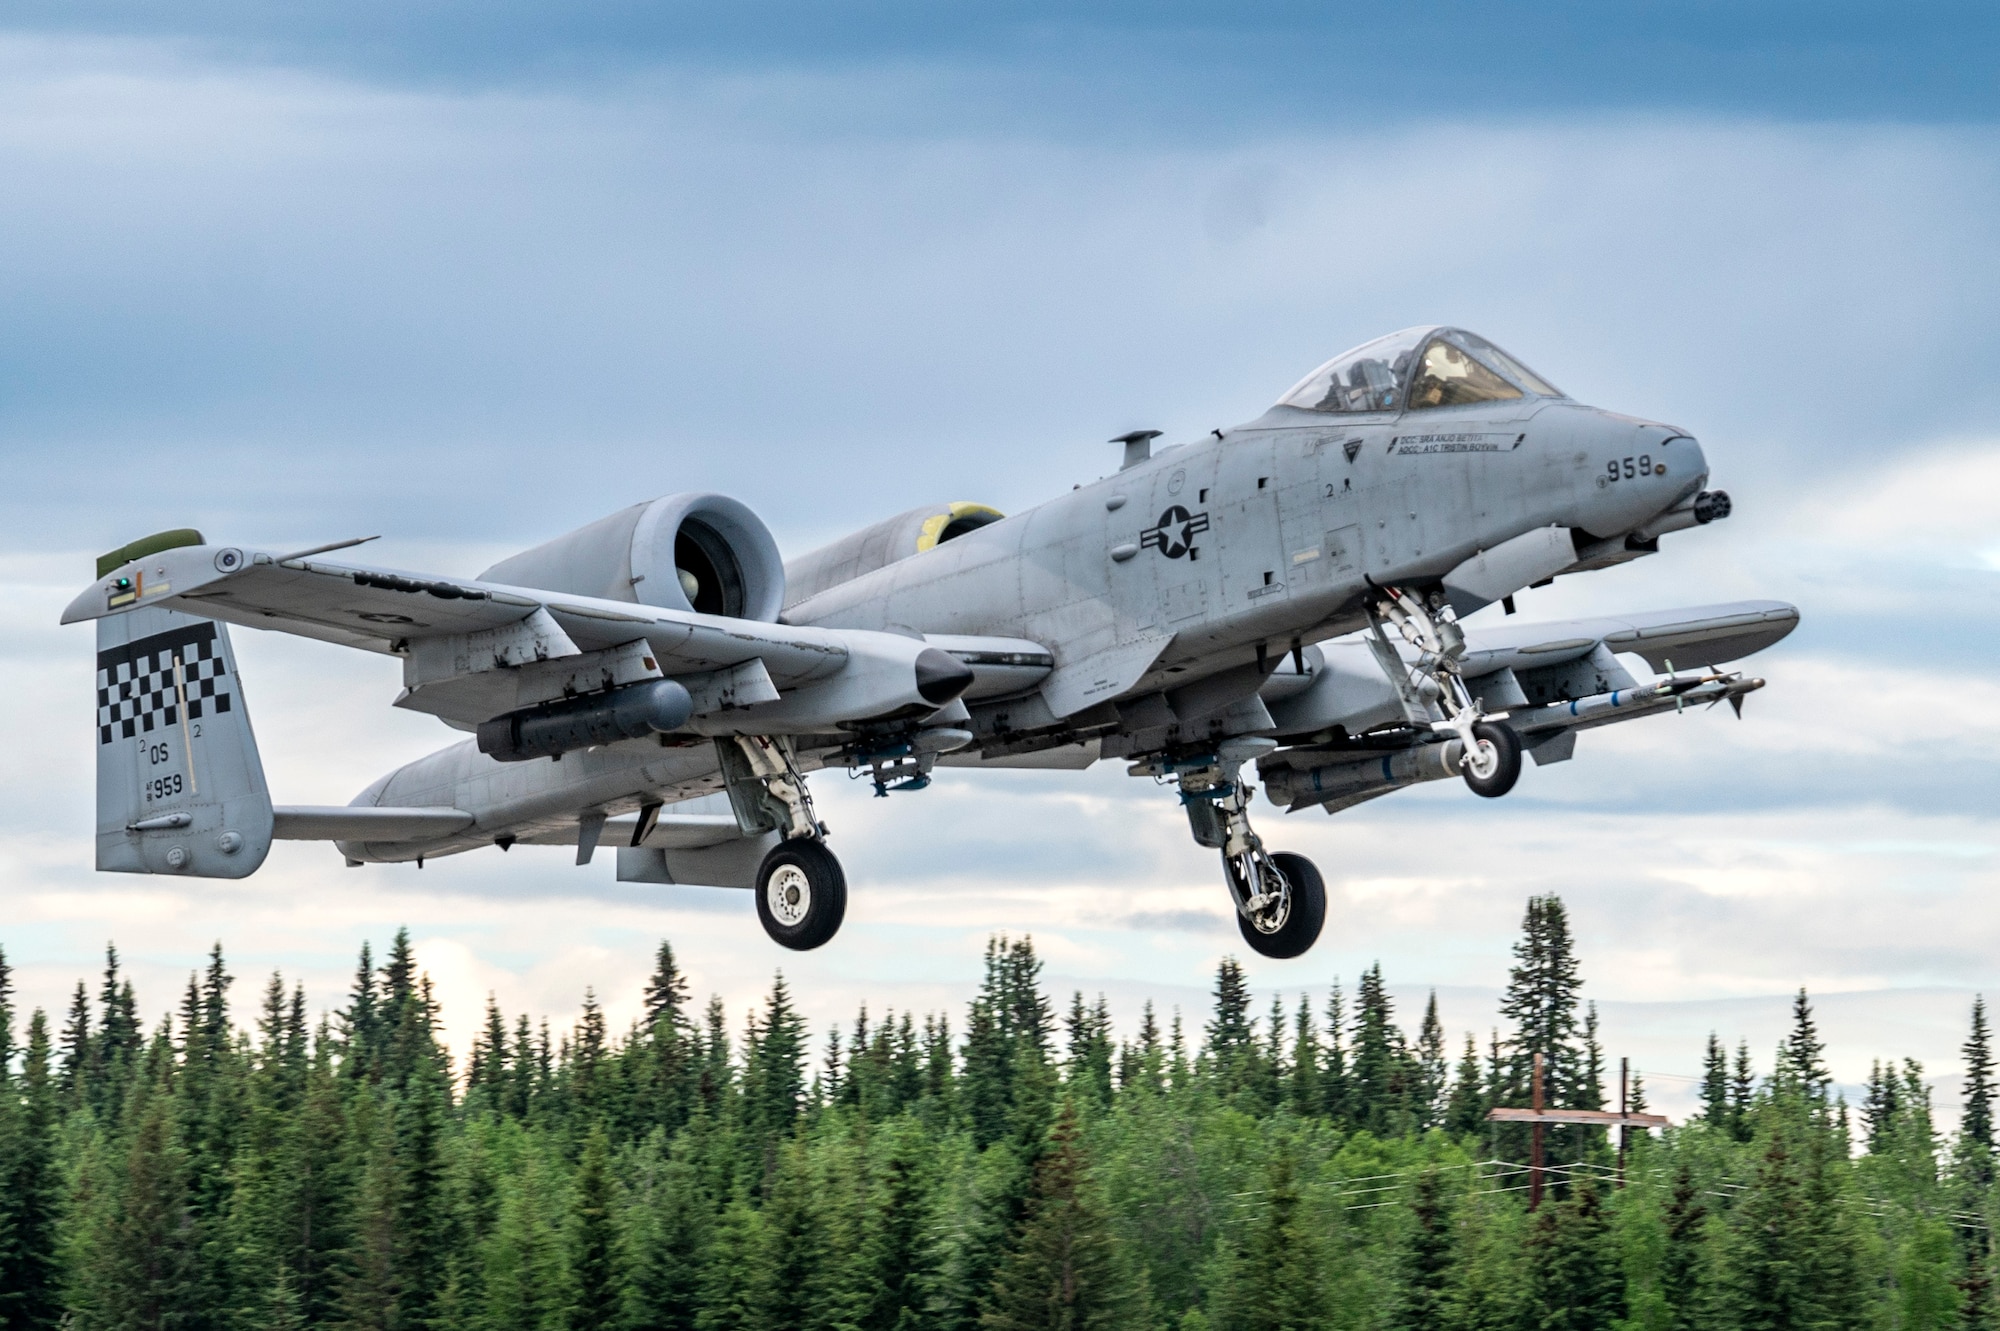 A U.S. Air Force A-10C Thunderbolt II from the 25th Fighter Squadron takes off during the first day of Red Flag Alaska 23-2 at Eielson Air Force Base, Alaska, June 9, 2023.